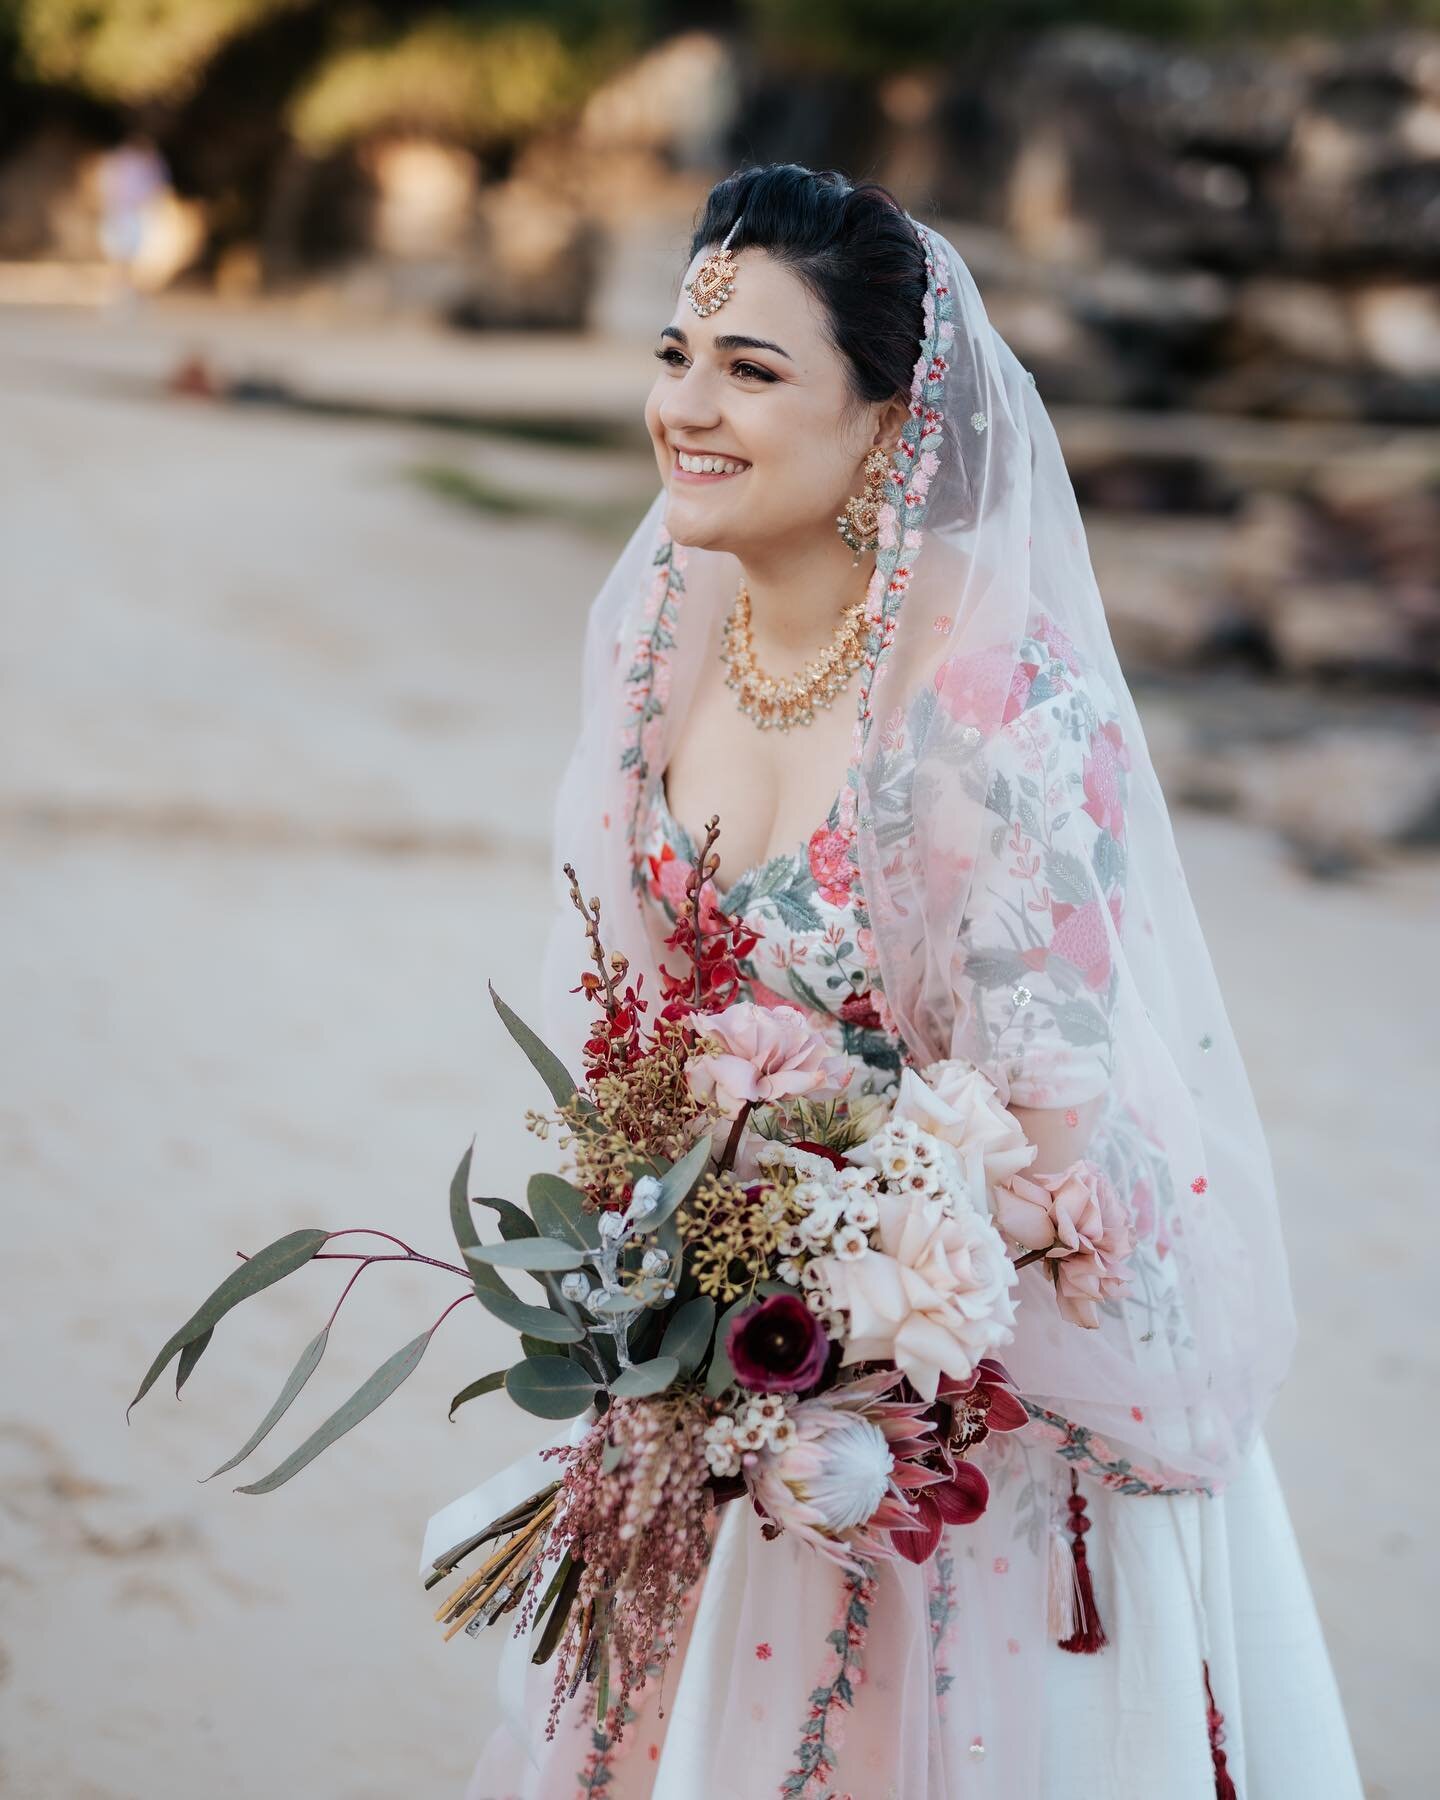 ✨Polka Dot Wedding Feature ✨
Where to even begin sharing favourites from Lauren &amp; Nico&rsquo;s inner city wedding. From Lauren&rsquo;s lehenga, Nico&rsquo;s custom suit, to dancing the night away on Sydney harbour - this was an unforgettable wedd